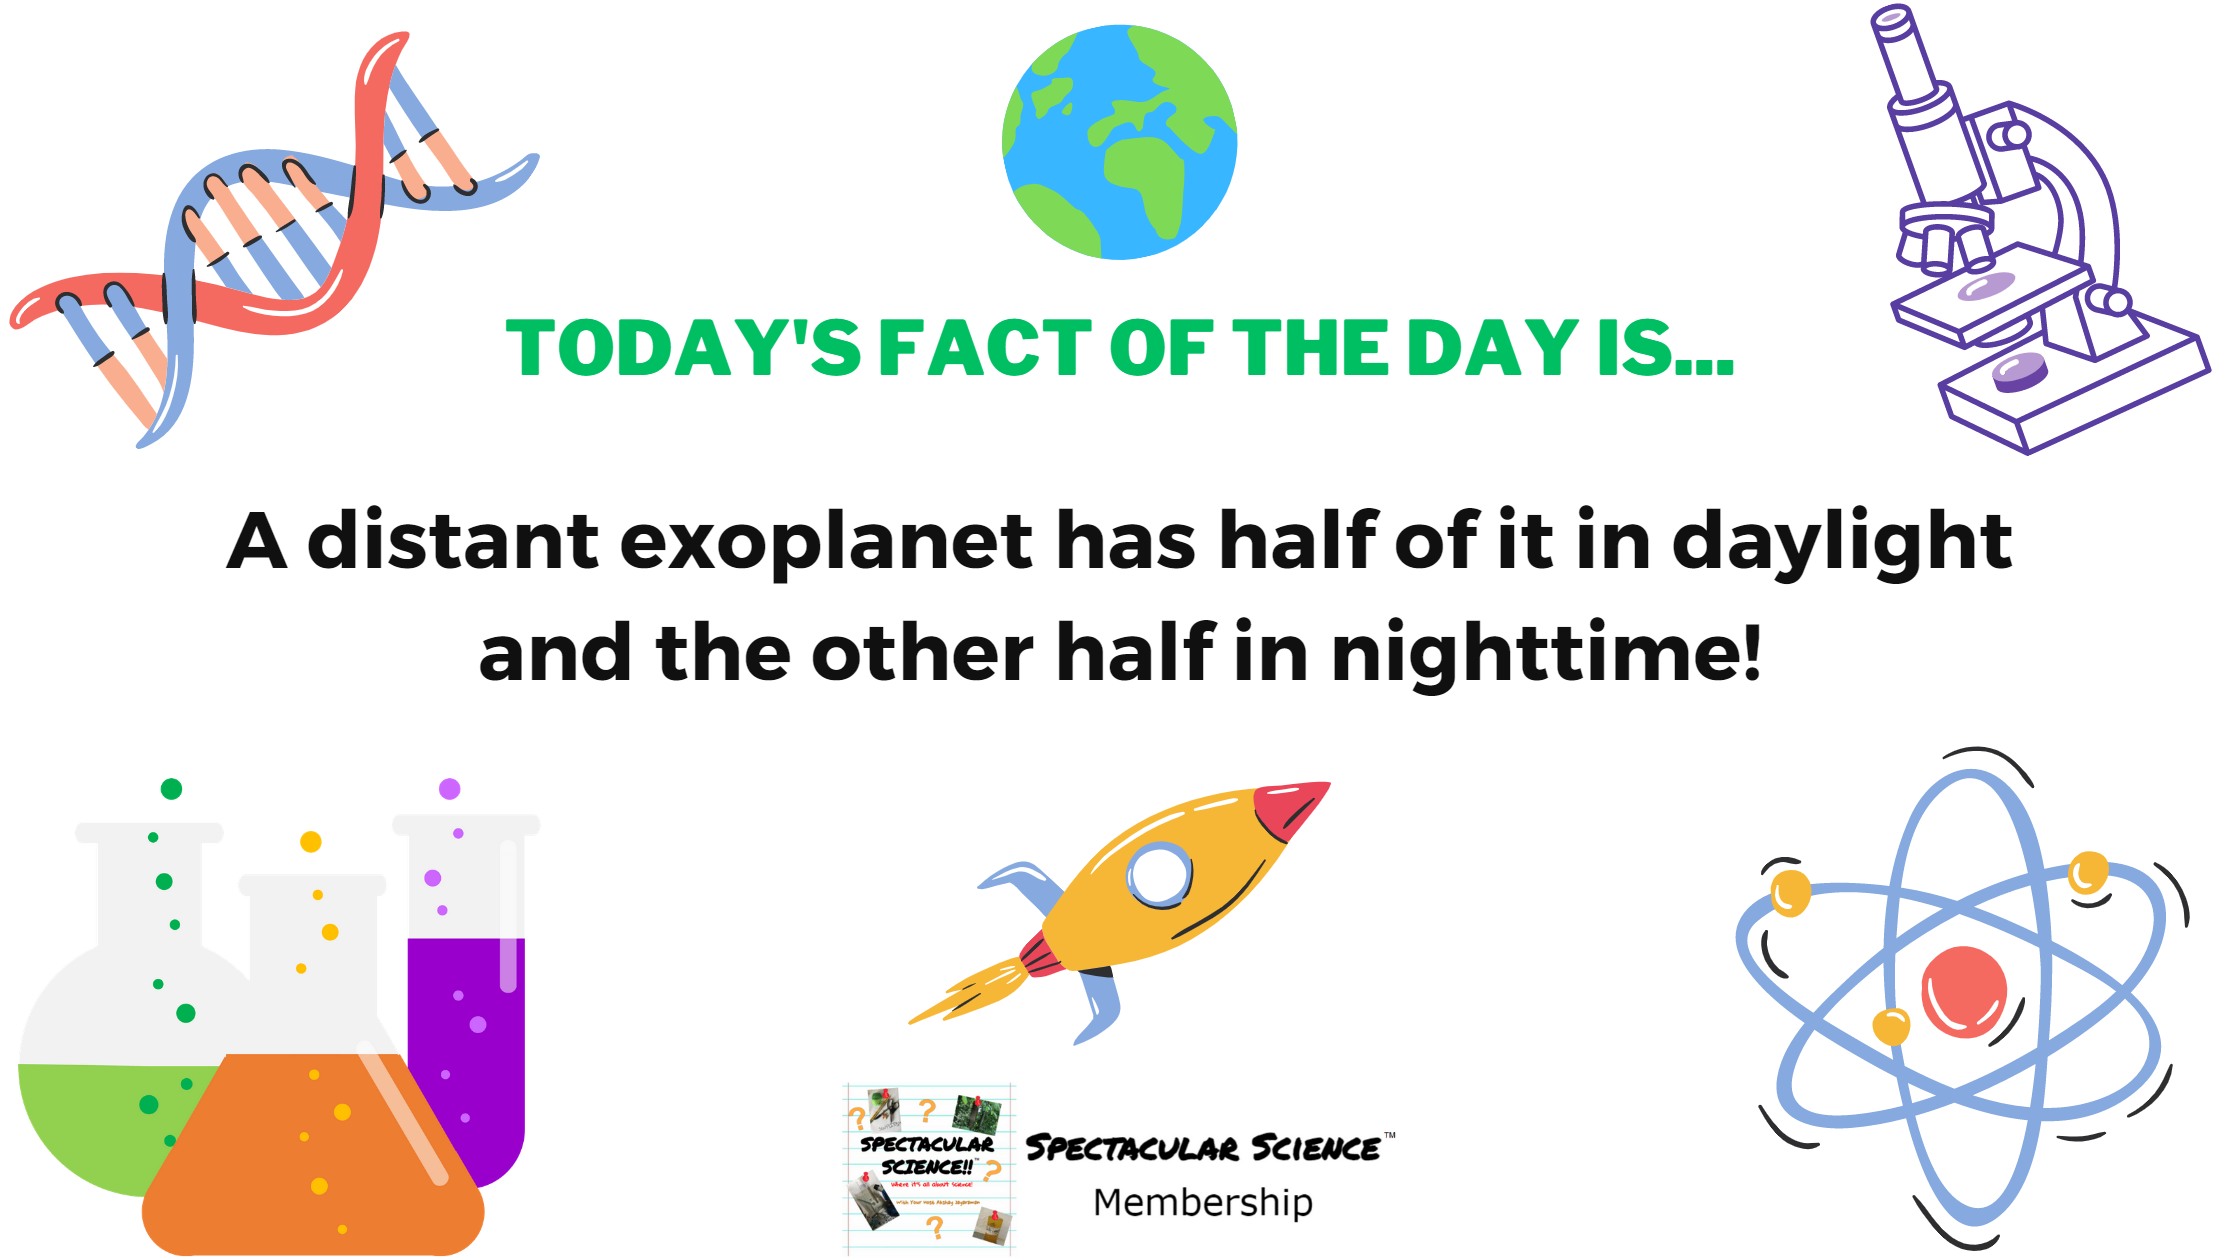 Fact of the Day Image May 9